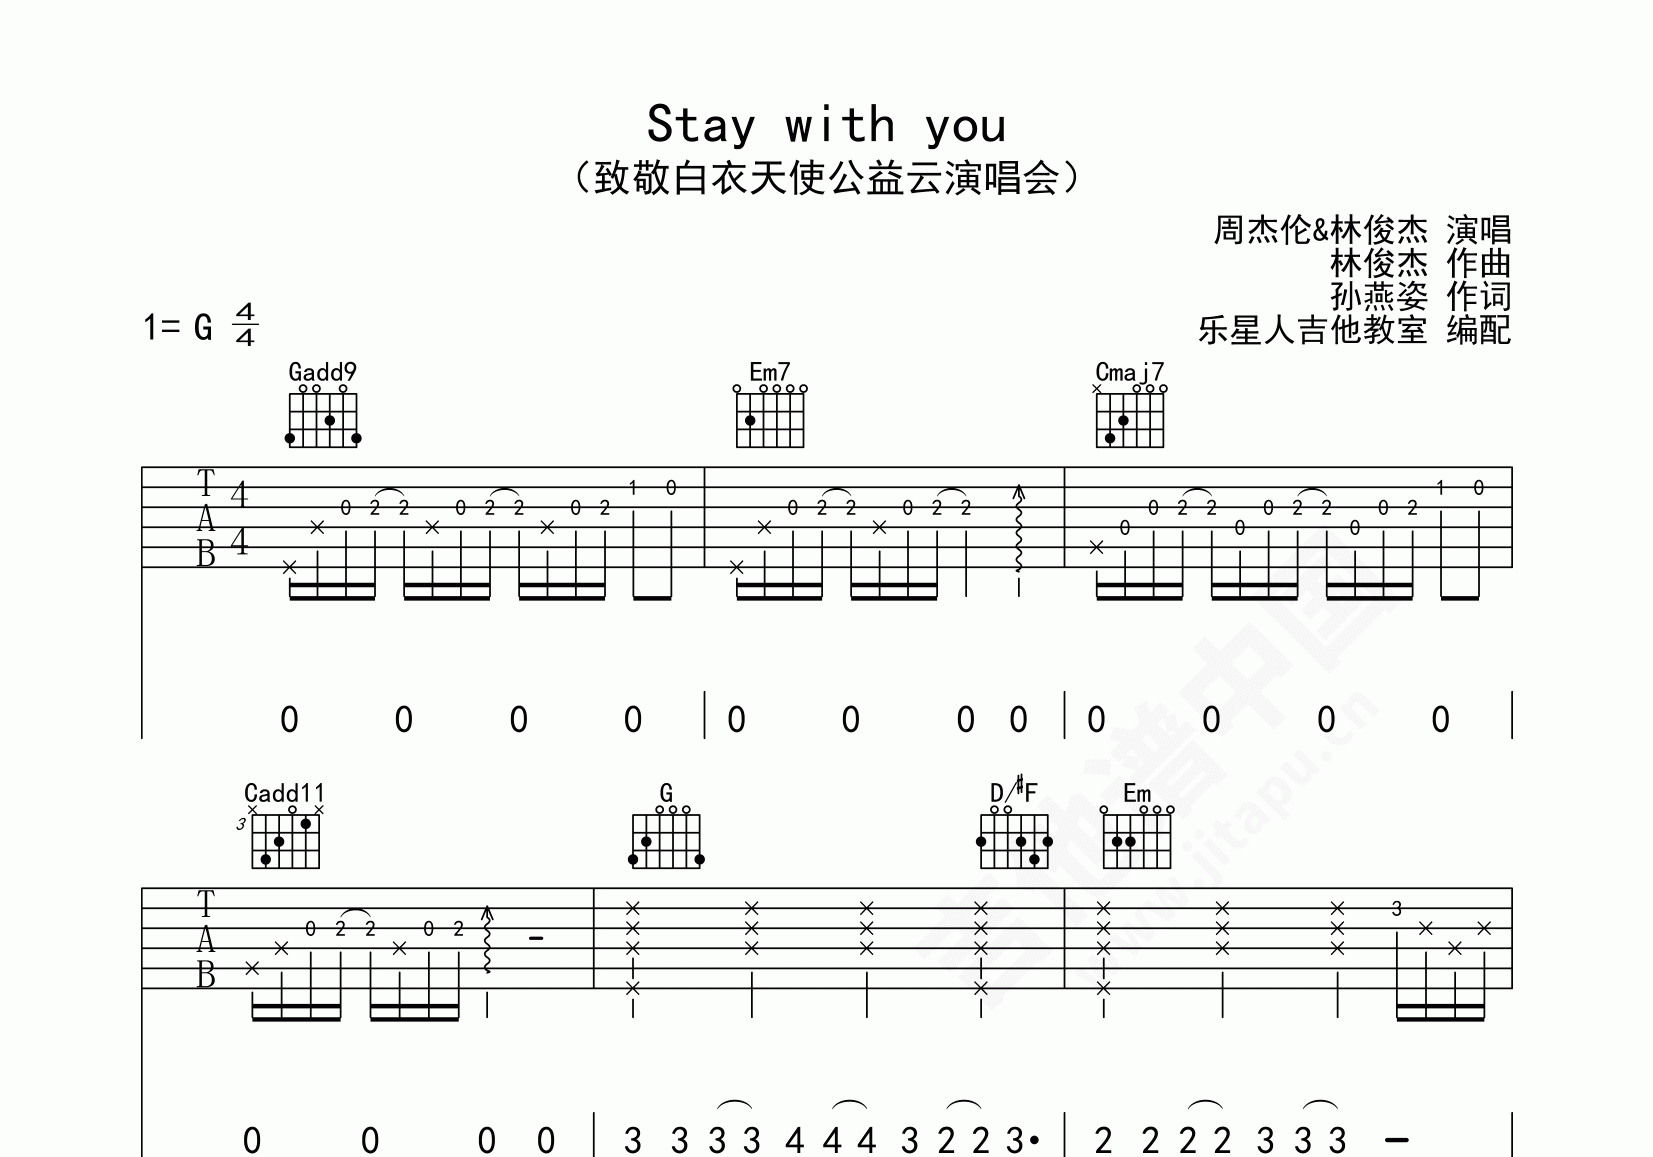 TO BE WITH YOU吉他谱_加州音乐_D调弹唱100%翻弹版 - 吉他世界